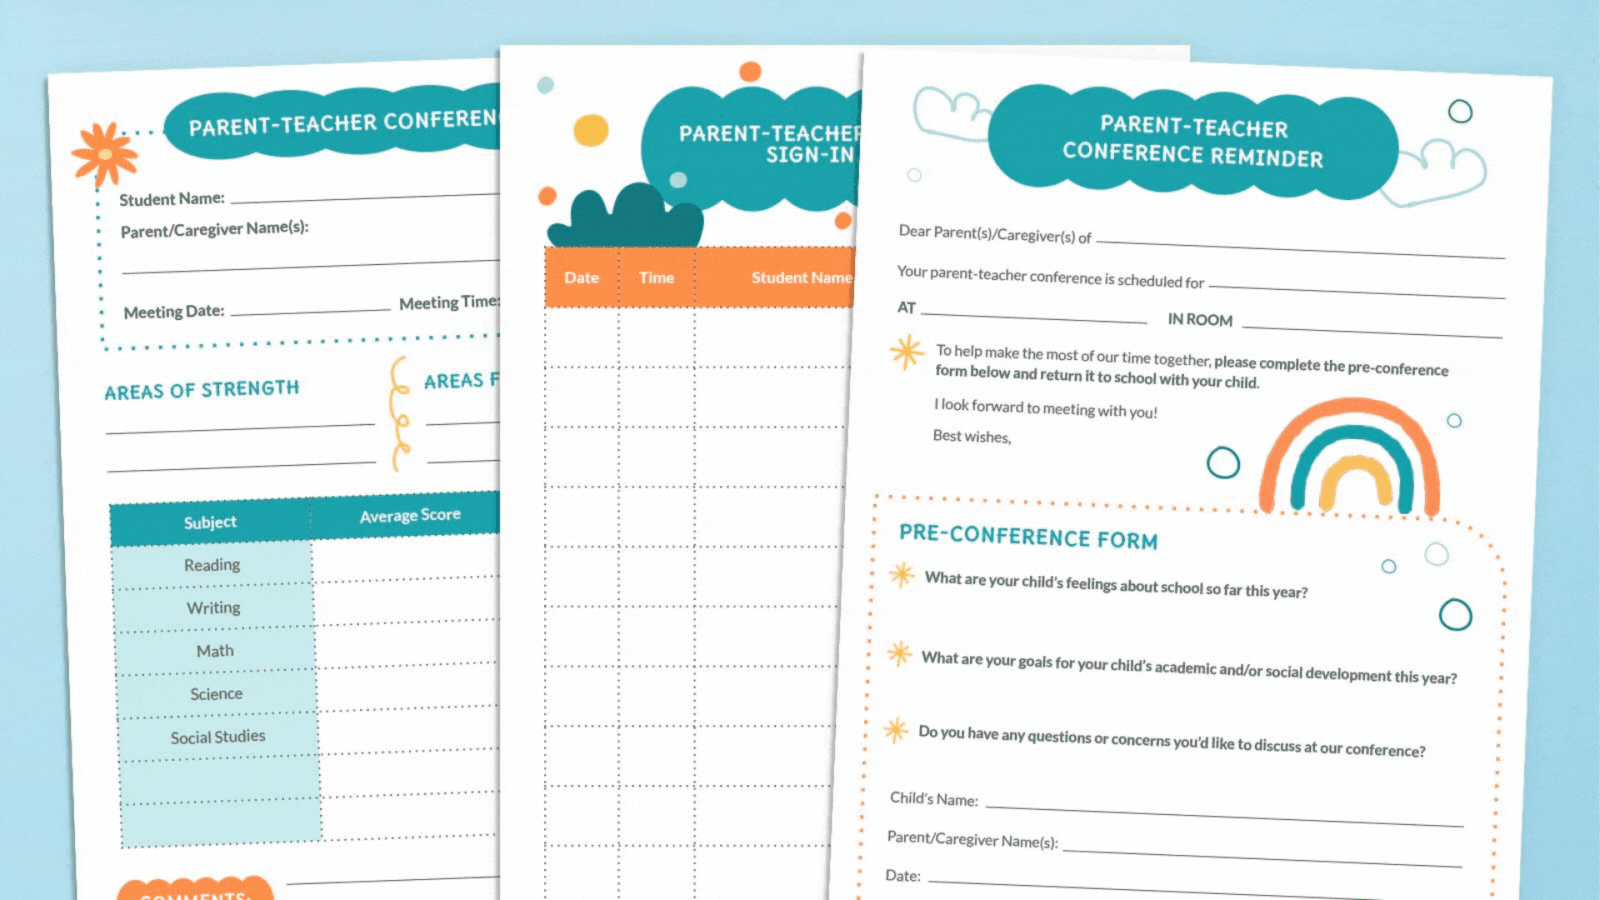 Parent-teacher conference forms in different styles.